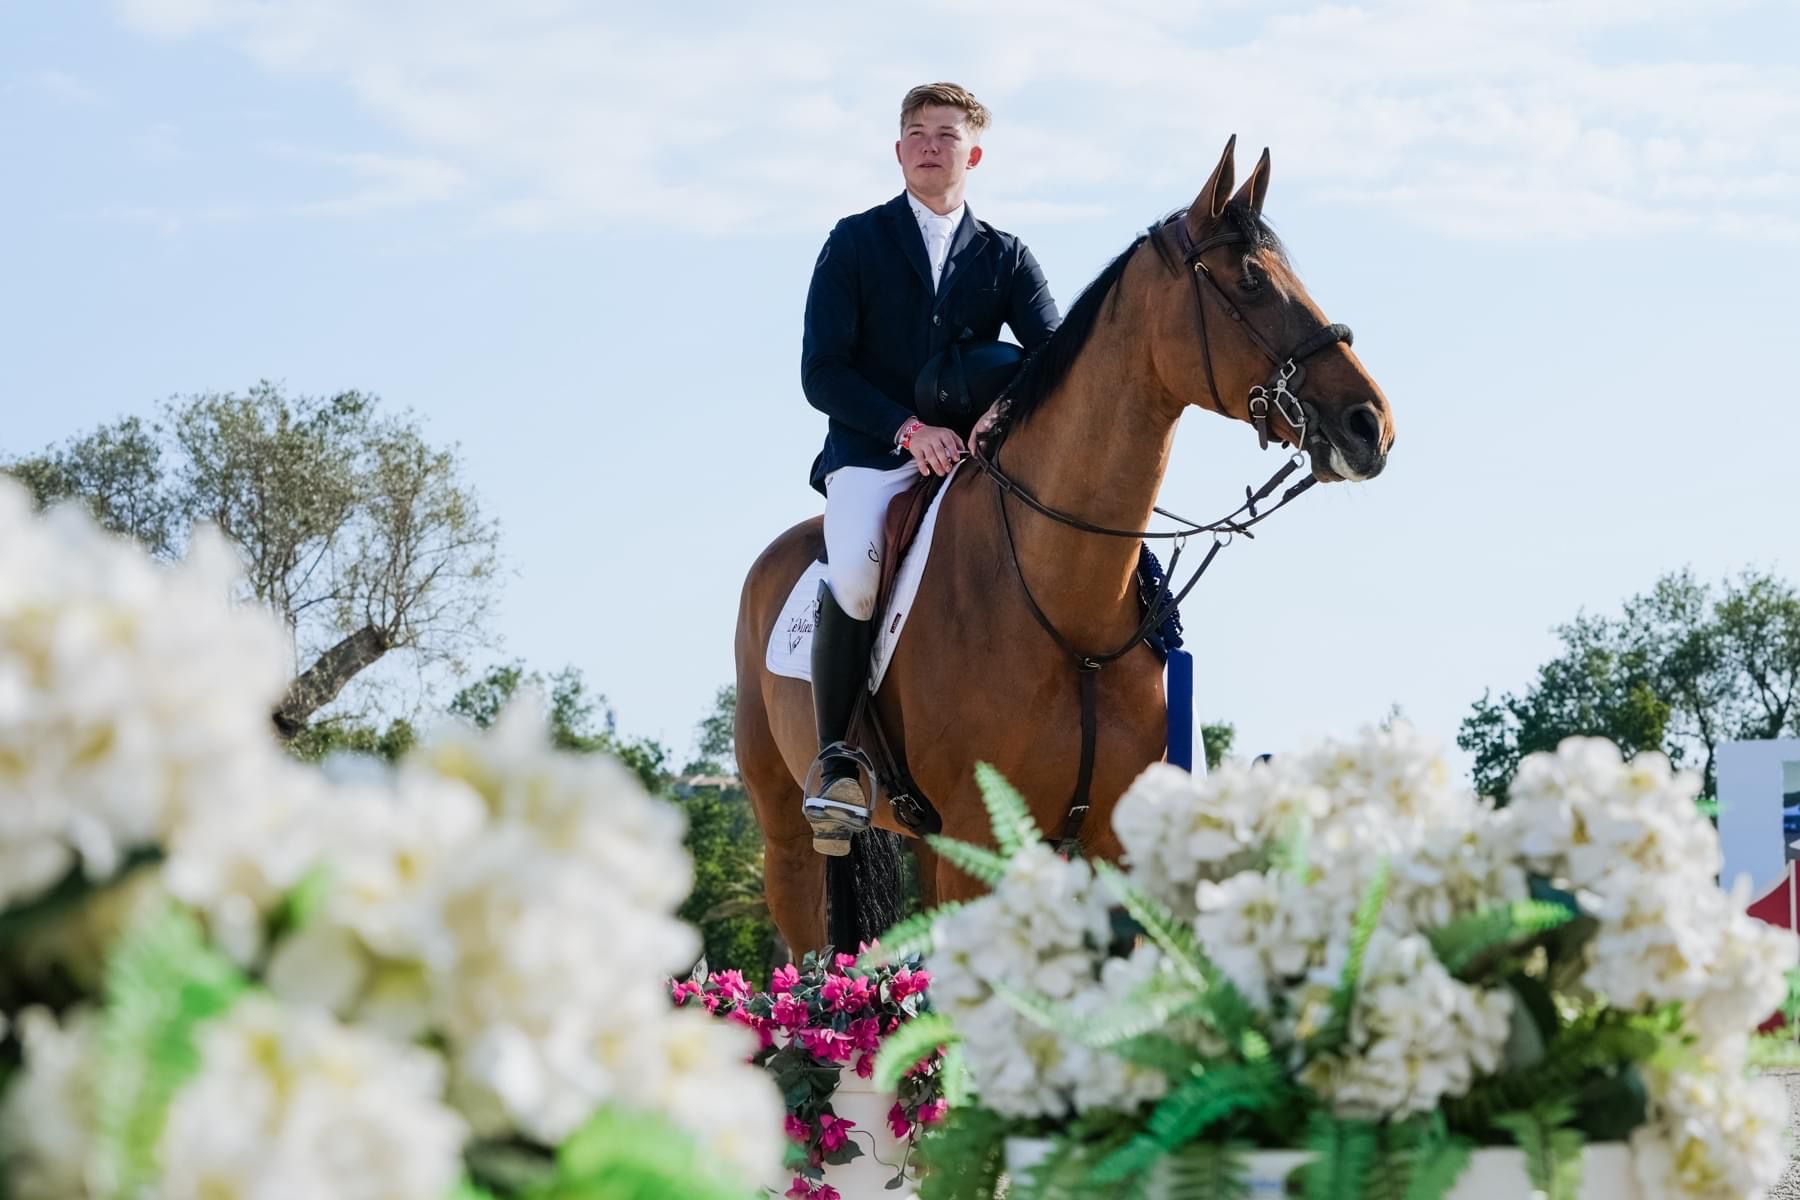 Harry Charles concludes the day with a victory in the 1m50 LR class of Saint Tropez